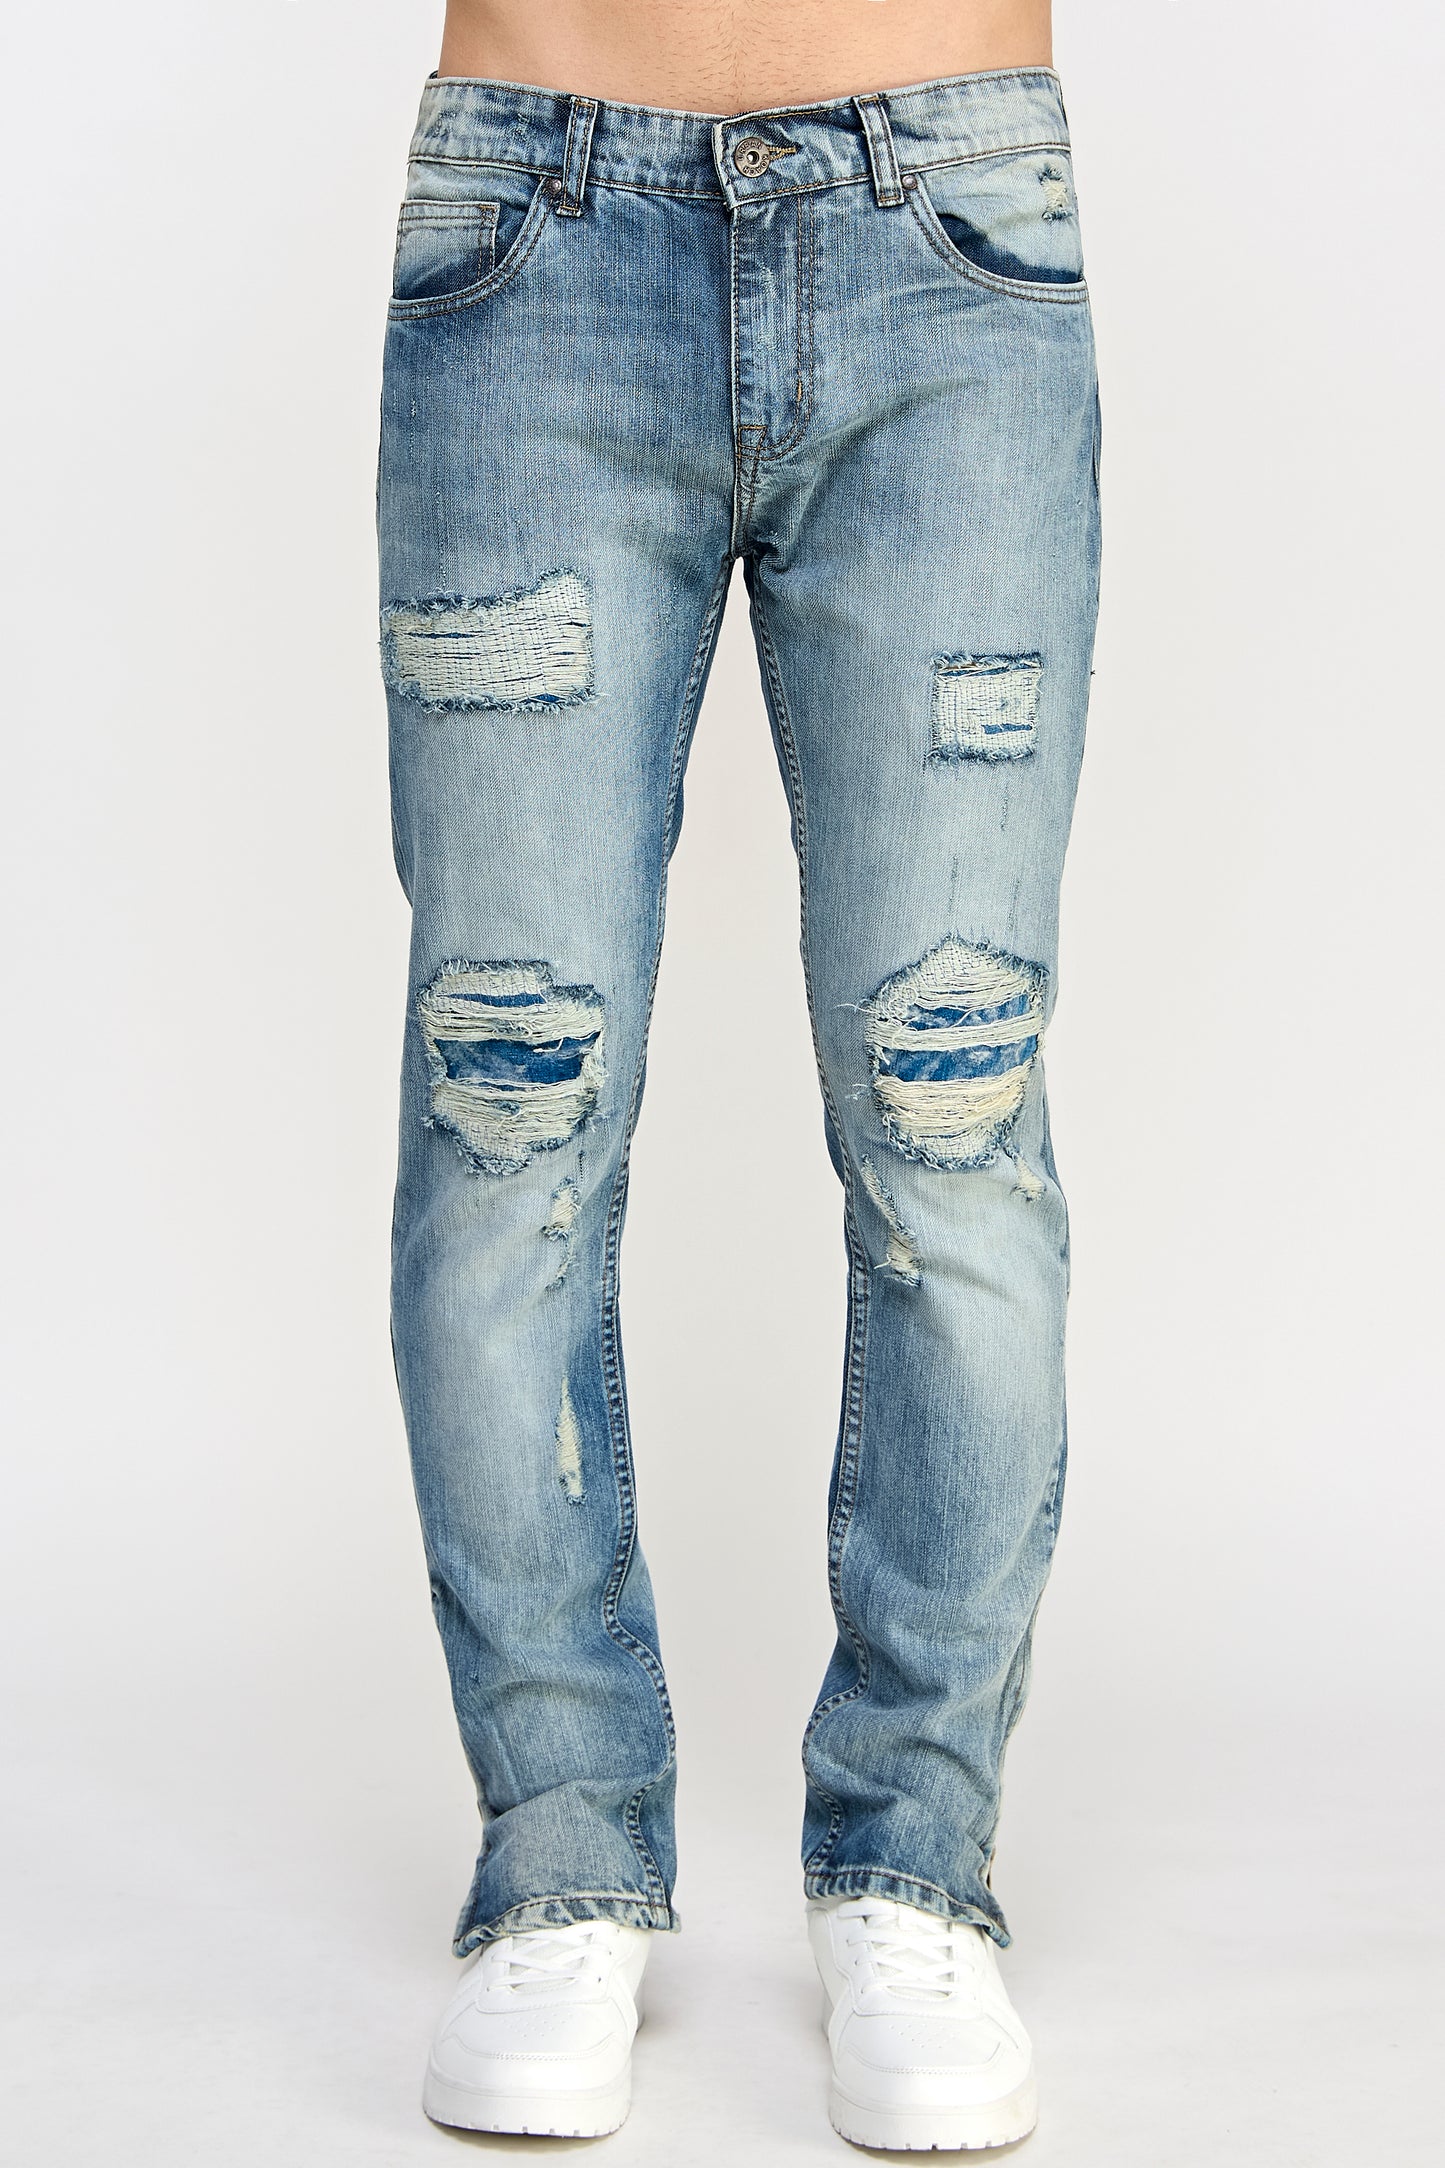 Ripped Men's Jeans